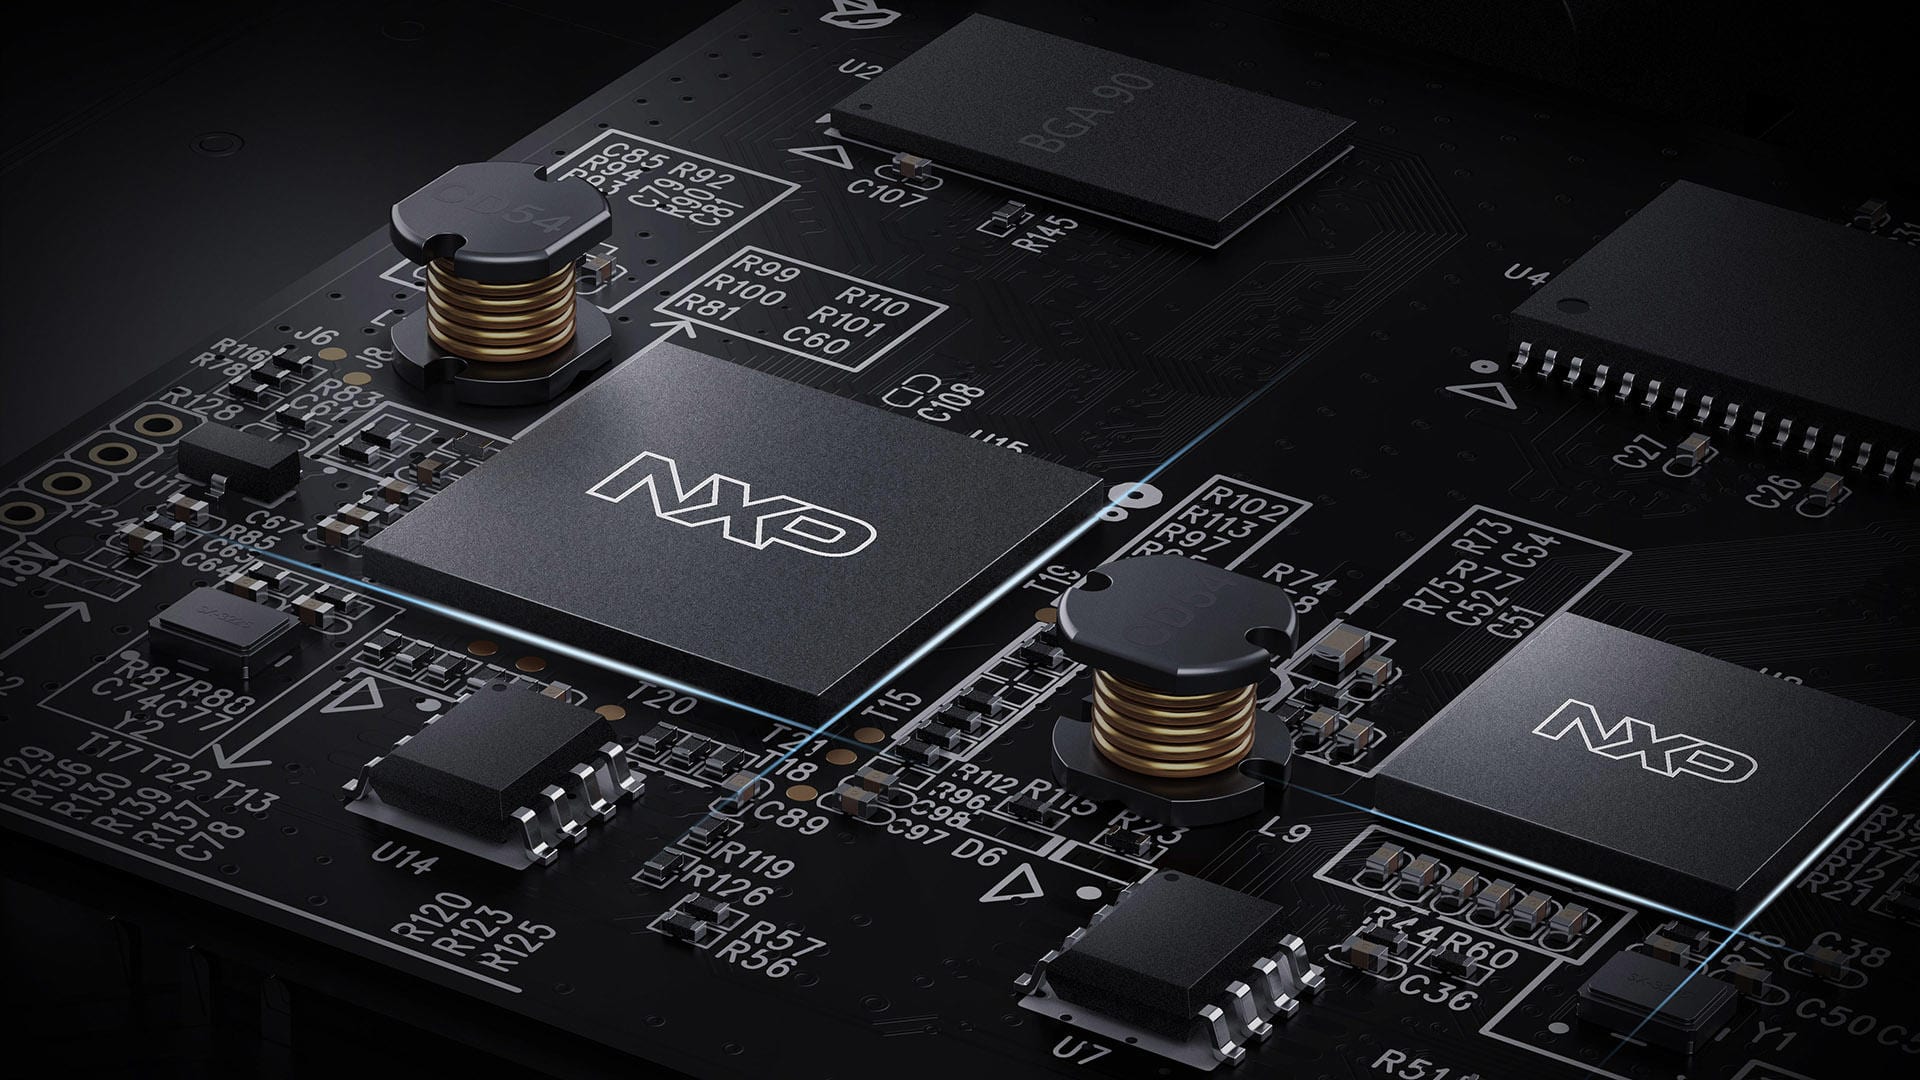 NUX MG-30 has two NXP RT processors